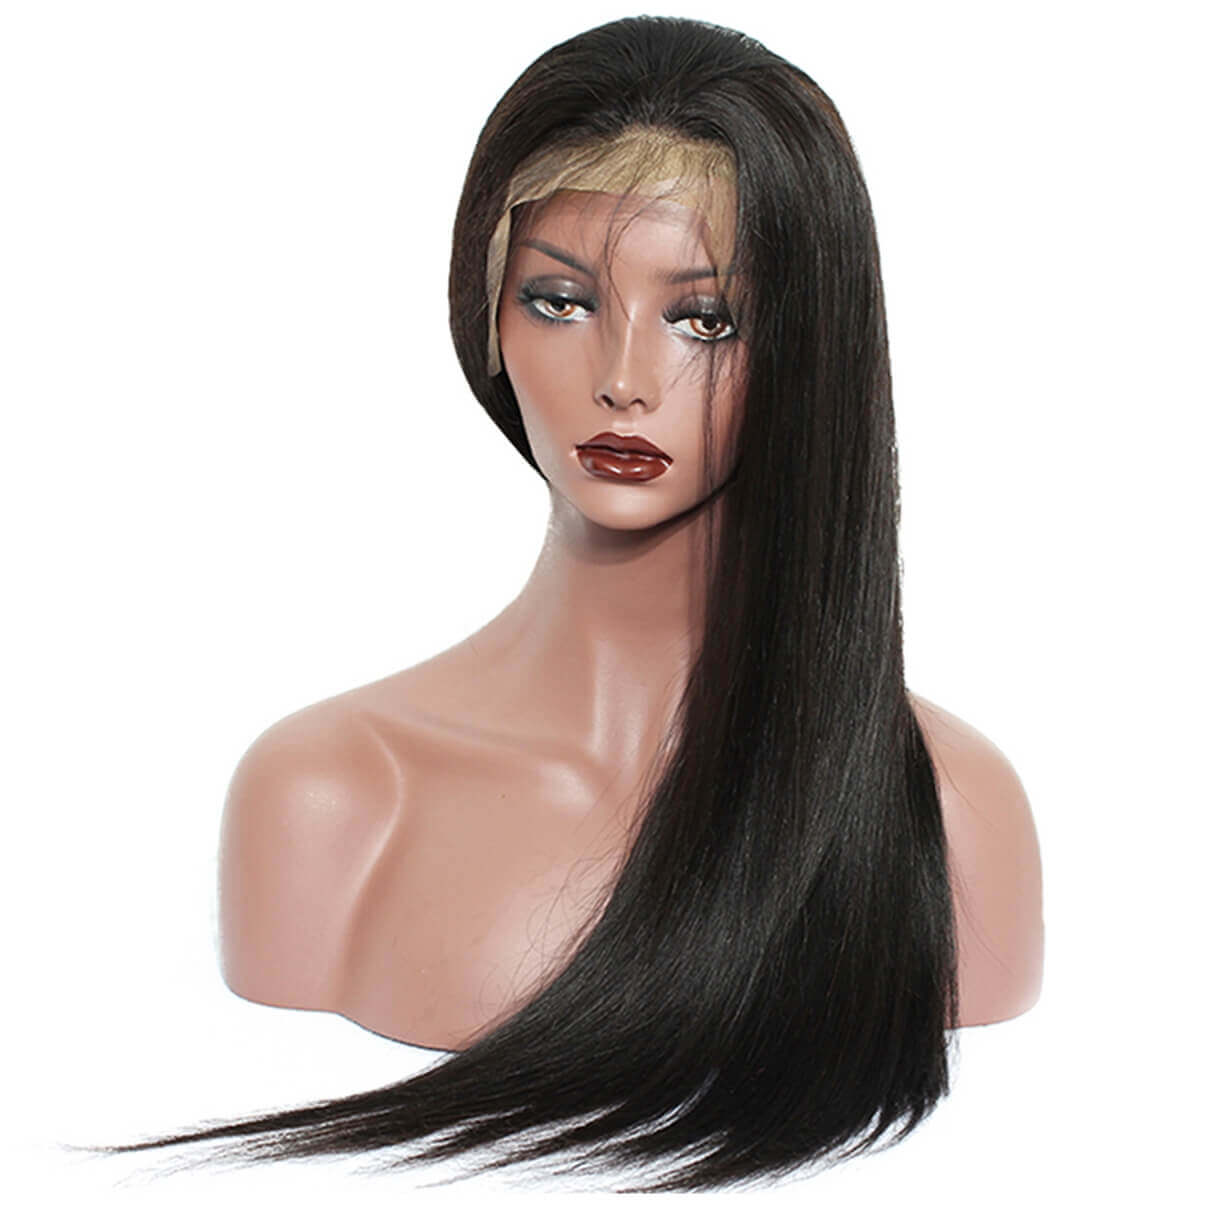 Lakihair 100% Unprocessed Human Hair Silky Straight Lace Front Wigs With Baby Hair